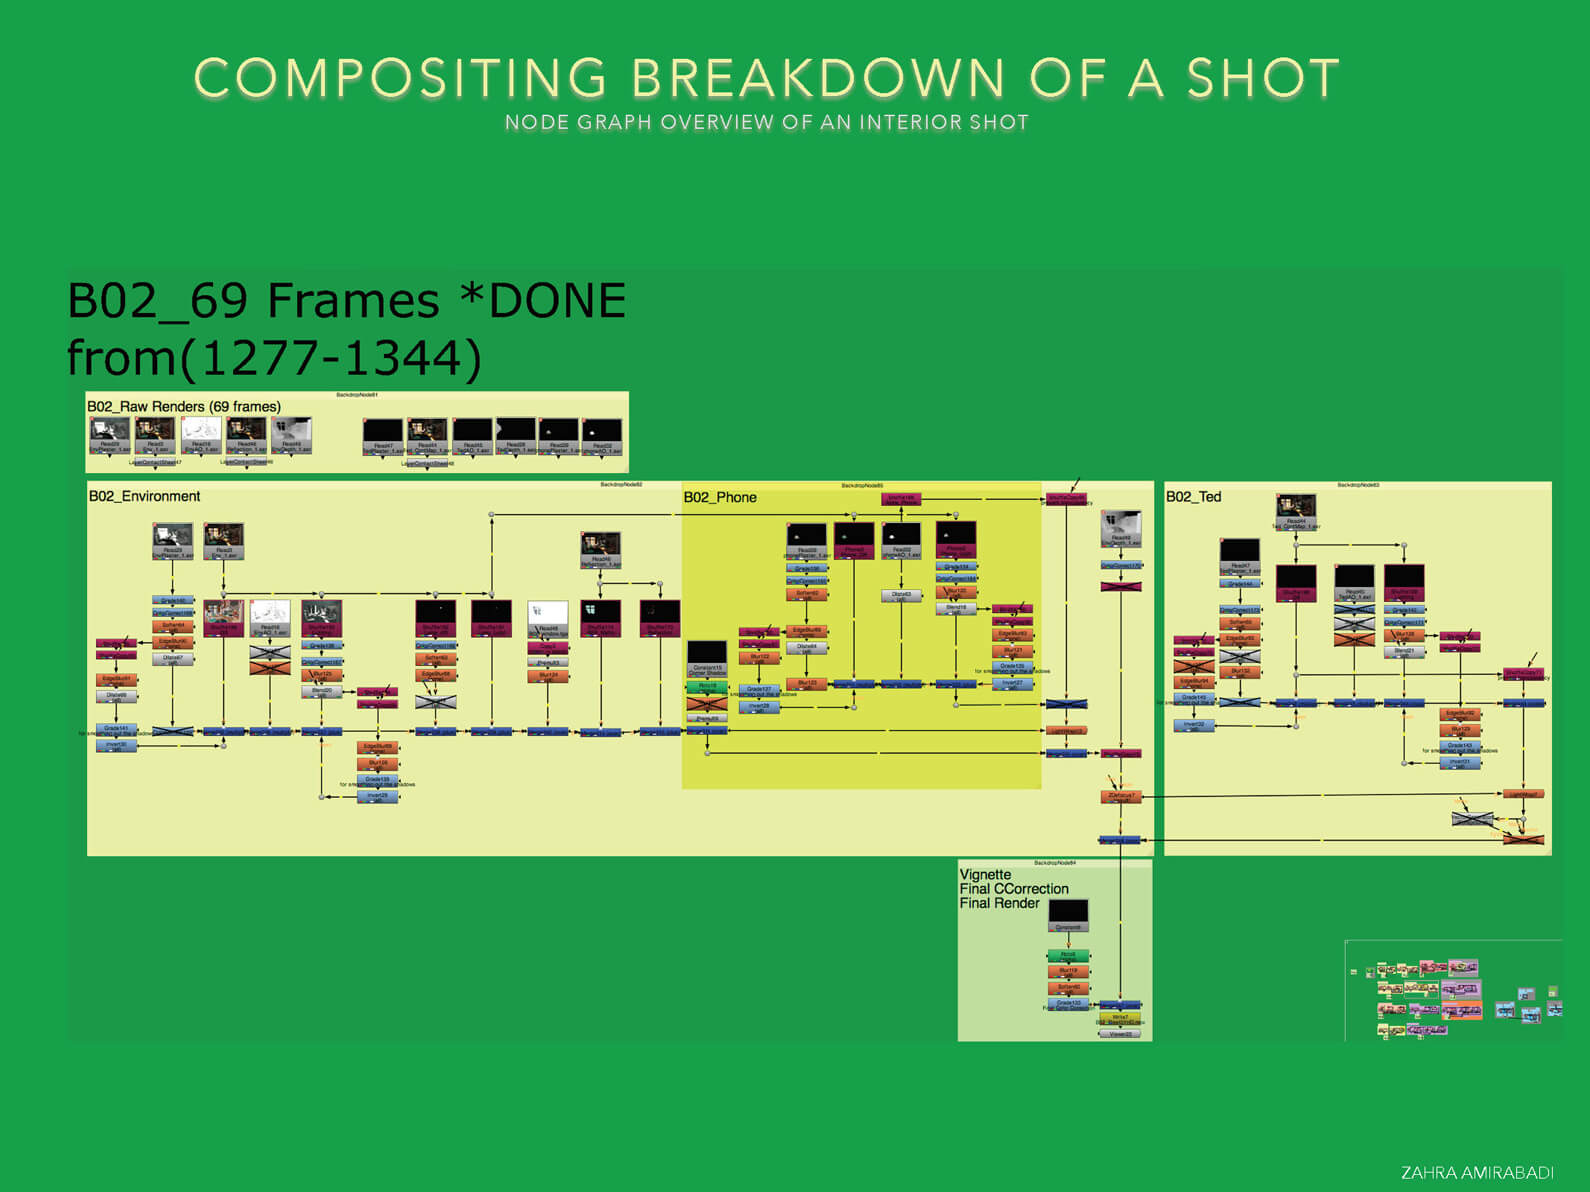 Compositing breakdown of shots depicting the timeline of animated sequences in Orientation Center for the Unseen